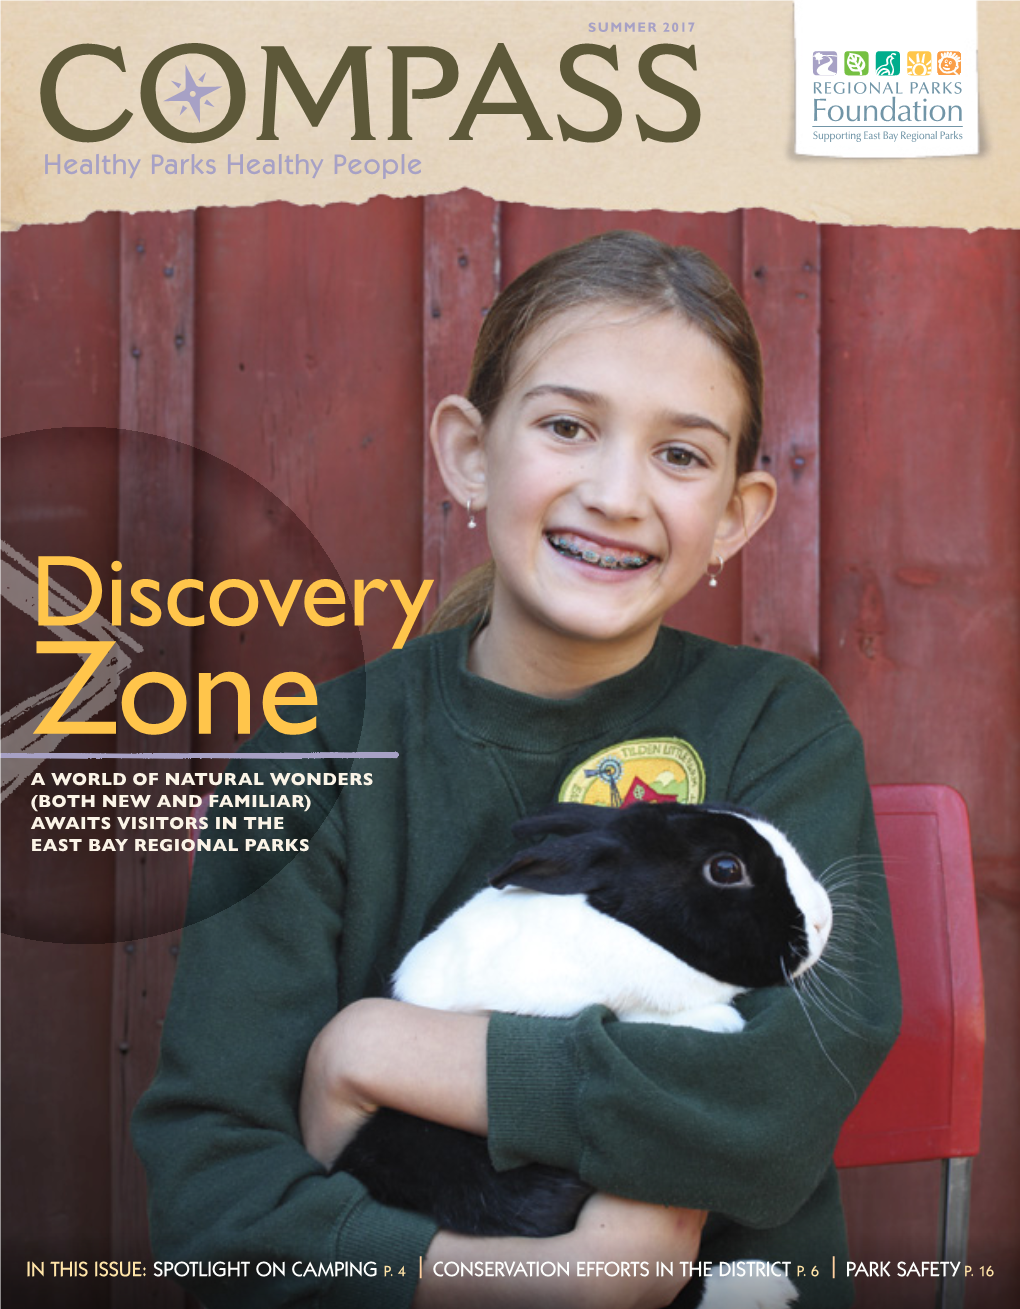 Discovery Zone a World of Natural Wonders (Both New and Familiar) Awaits Visitors in the East Bay Regional Parks